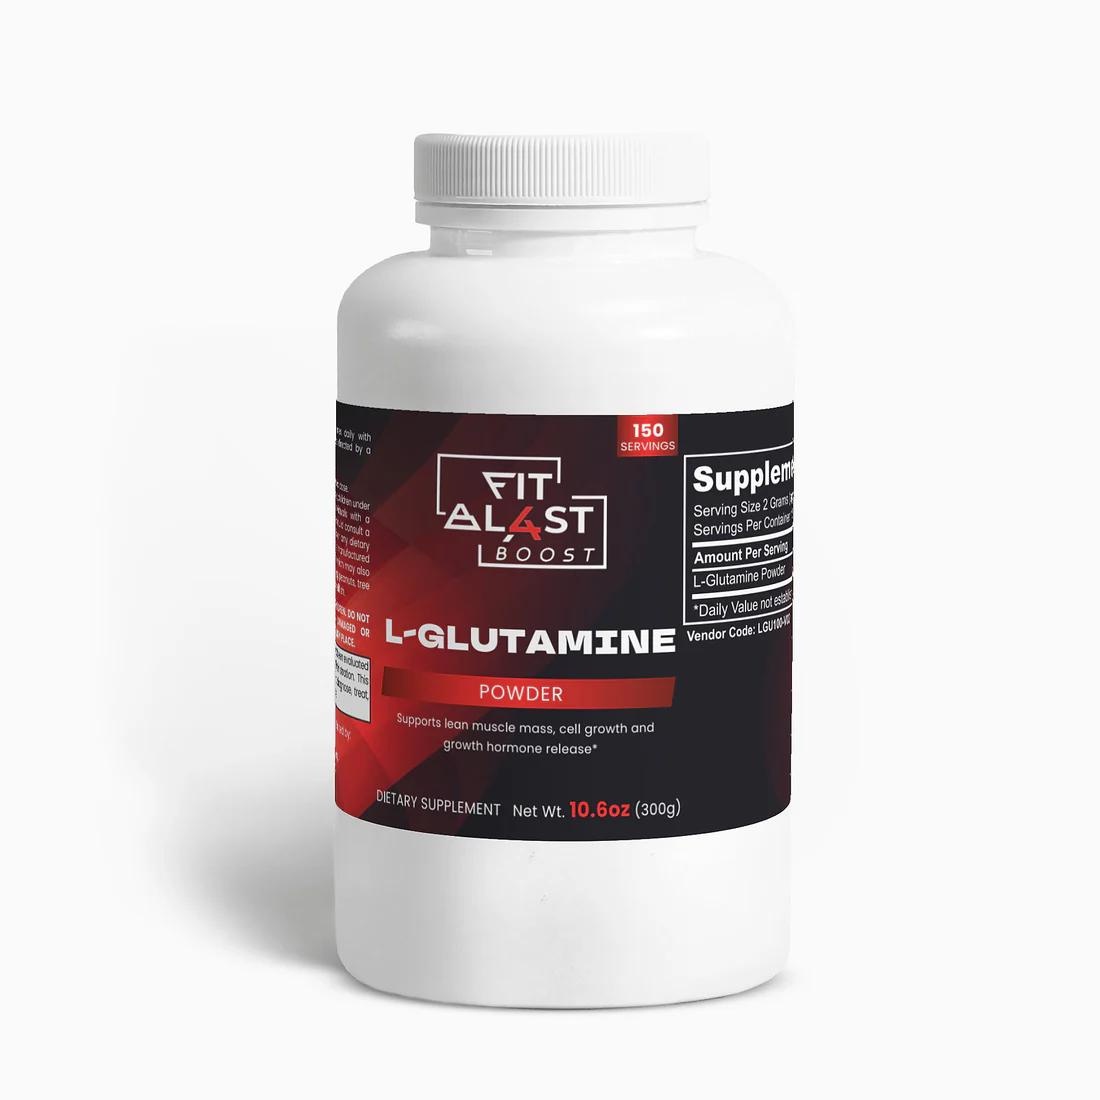 Buy L-Glutamine Powder: A Targeted Supplement for Active Lifestyles